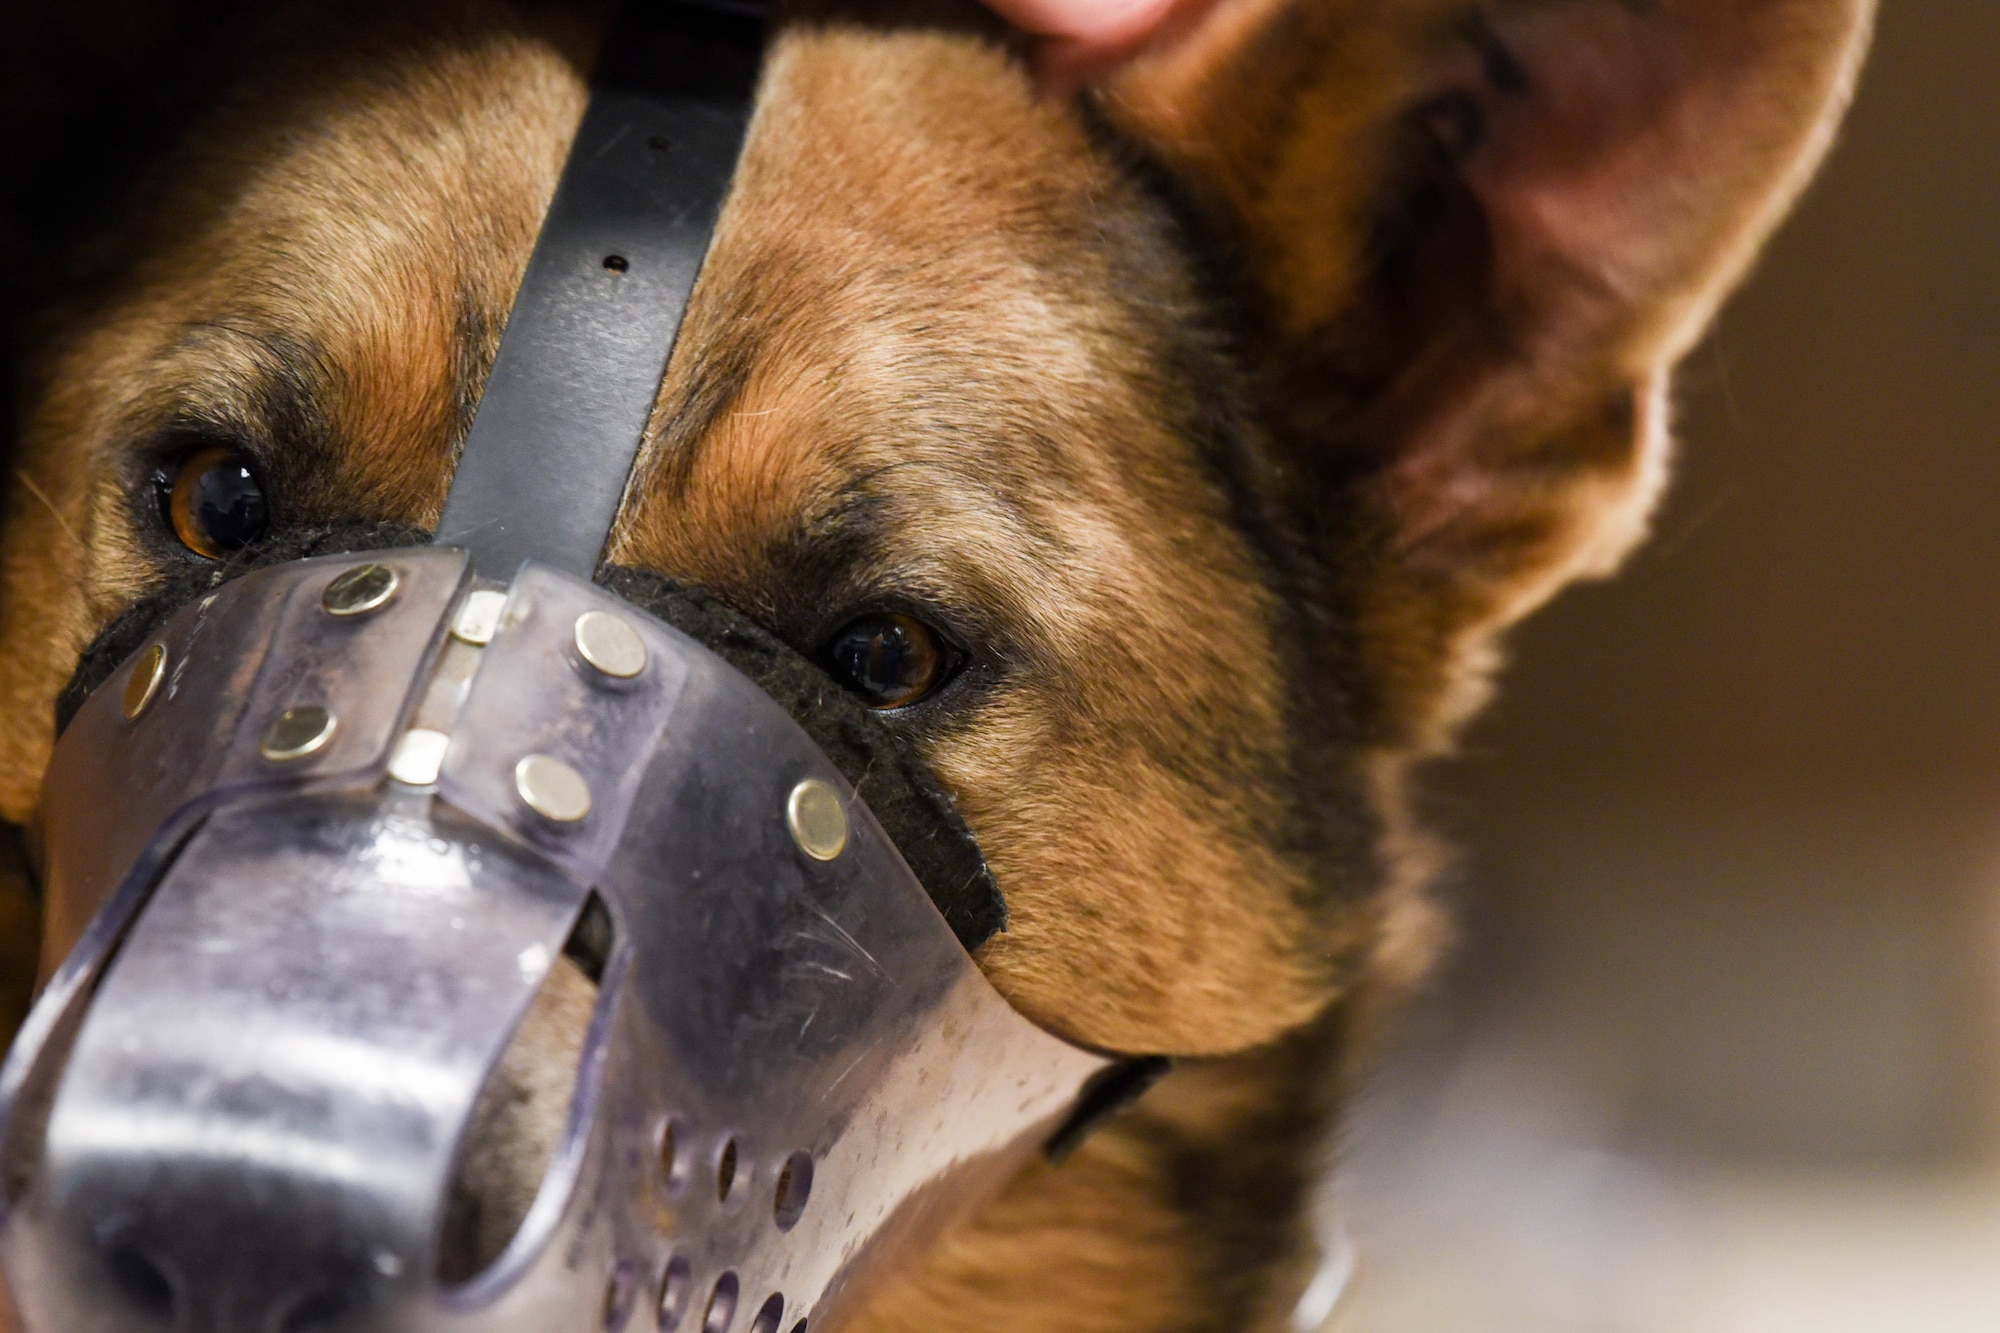 Military working dog Lezer patiently waits for his dental cleaning to begin at the veterinary clinic on Ellsworth Air Force Base, S.D., Dec. 4, 2018. These incredible animals play an important part in keeping Raider Airmen safe and the base secure. They deploy with their handlers and perform different tasks such as sniffing out explosives or running down intruders. (U.S. Air Force photo by Airman John Ennis)